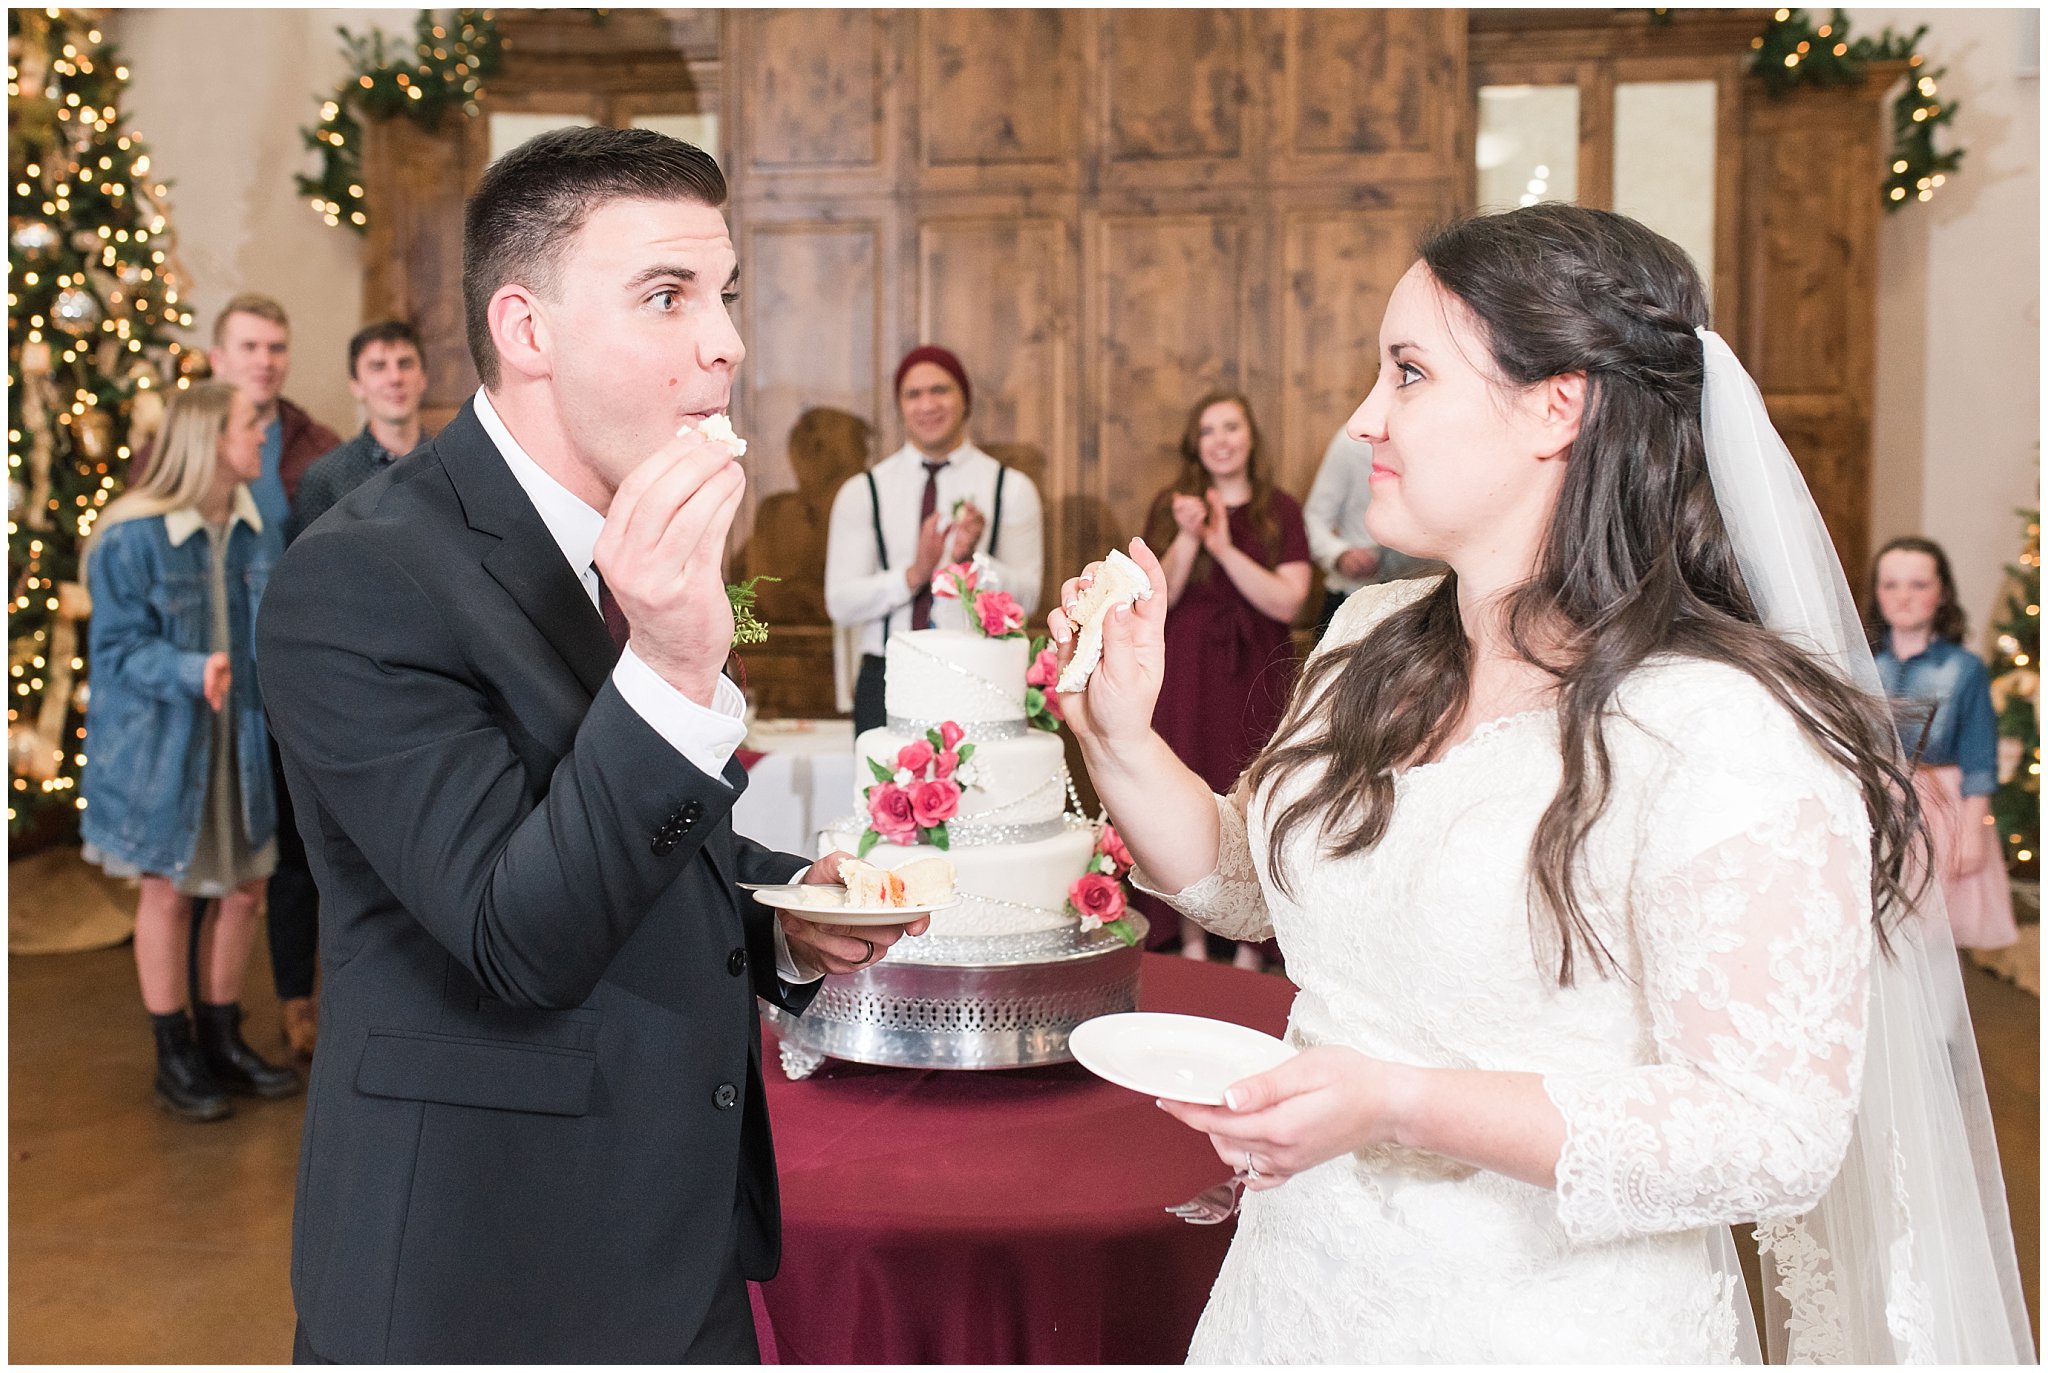 Bride and groom cake smash at the Gathering Place at Gardner Village | Gardner Village Wedding | The Gathering Place | Jessie and Dallin Photography